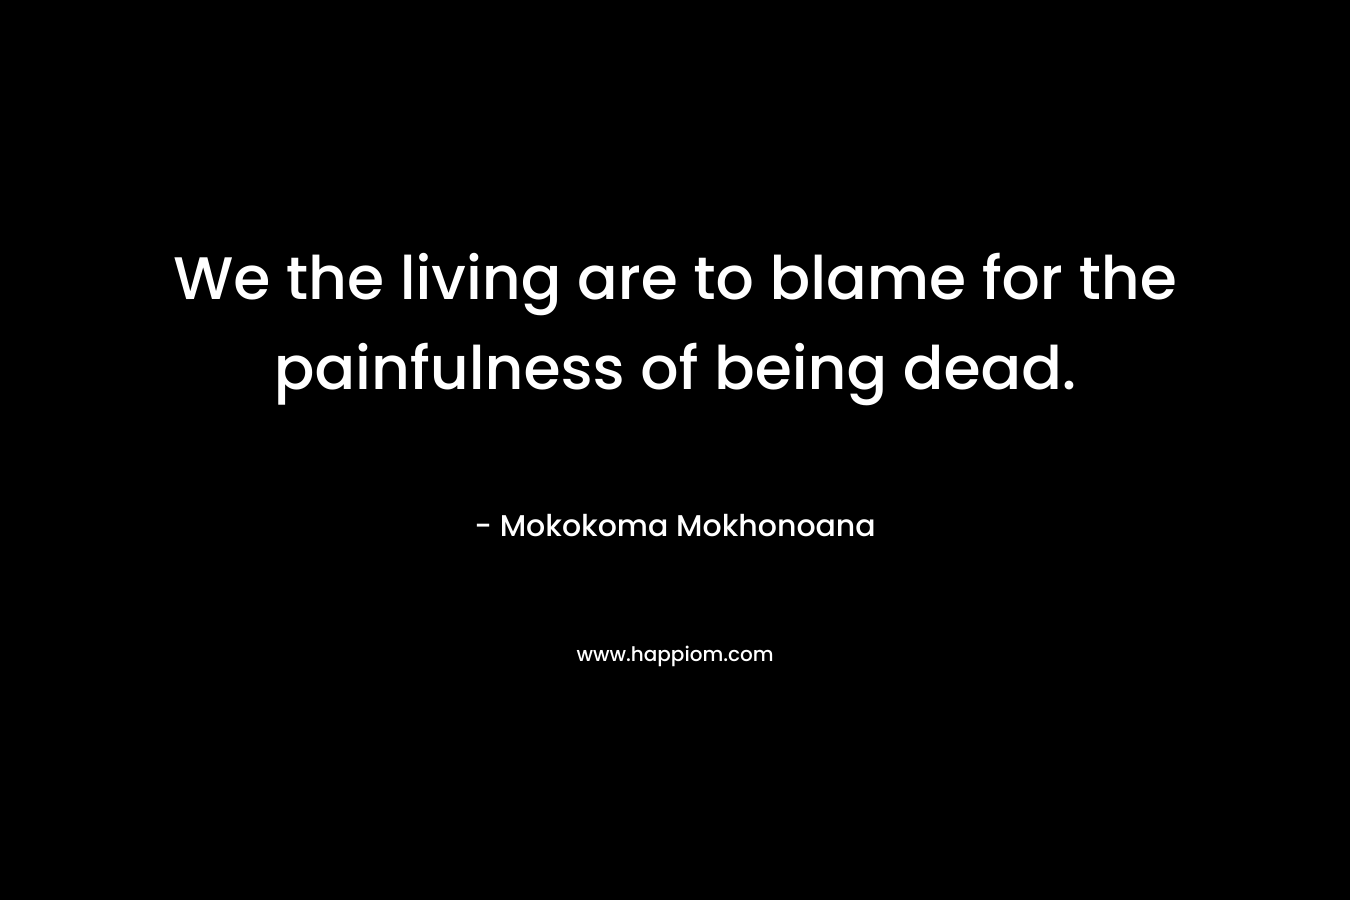 We the living are to blame for the painfulness of being dead.